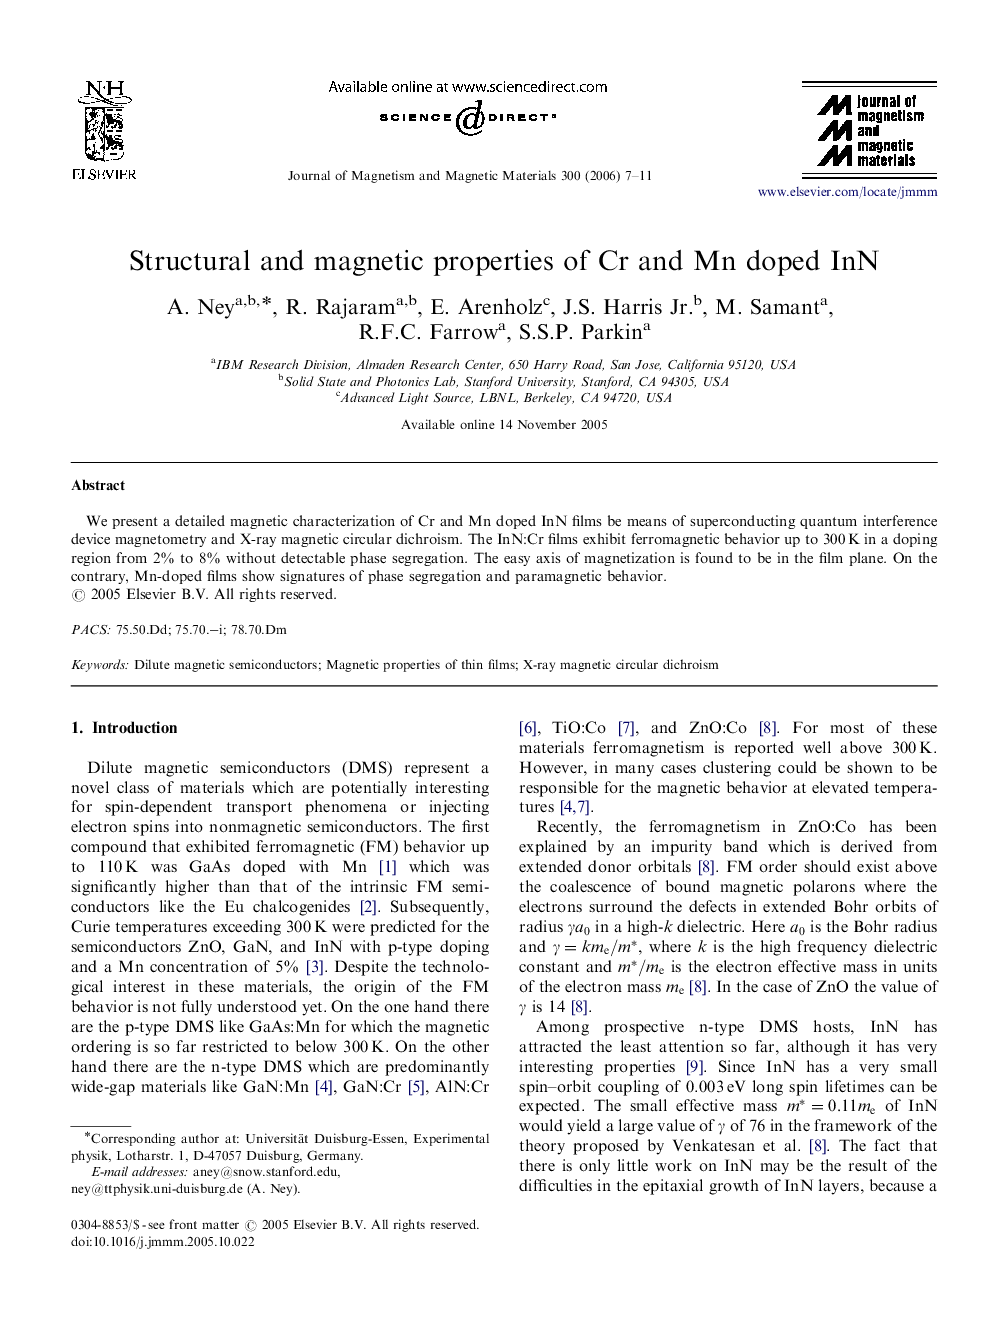 Structural and magnetic properties of Cr and Mn doped InN